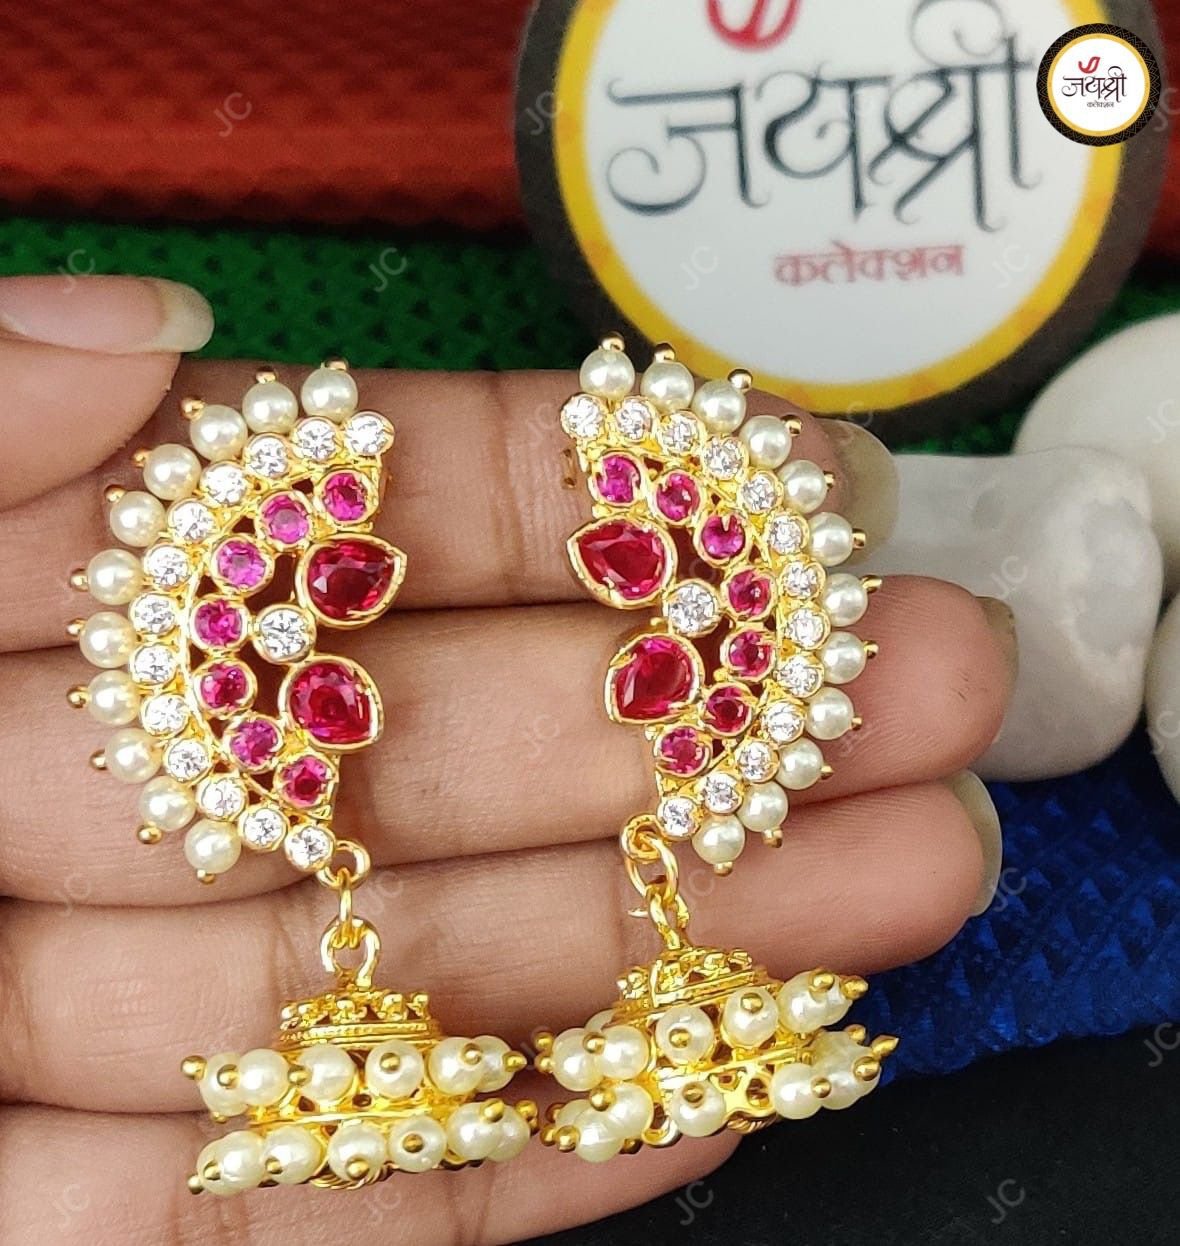 Buy Unique Corona Virus Designer Oxidiesed Pearl Beaded earrings for girls  and women at Amazon.in